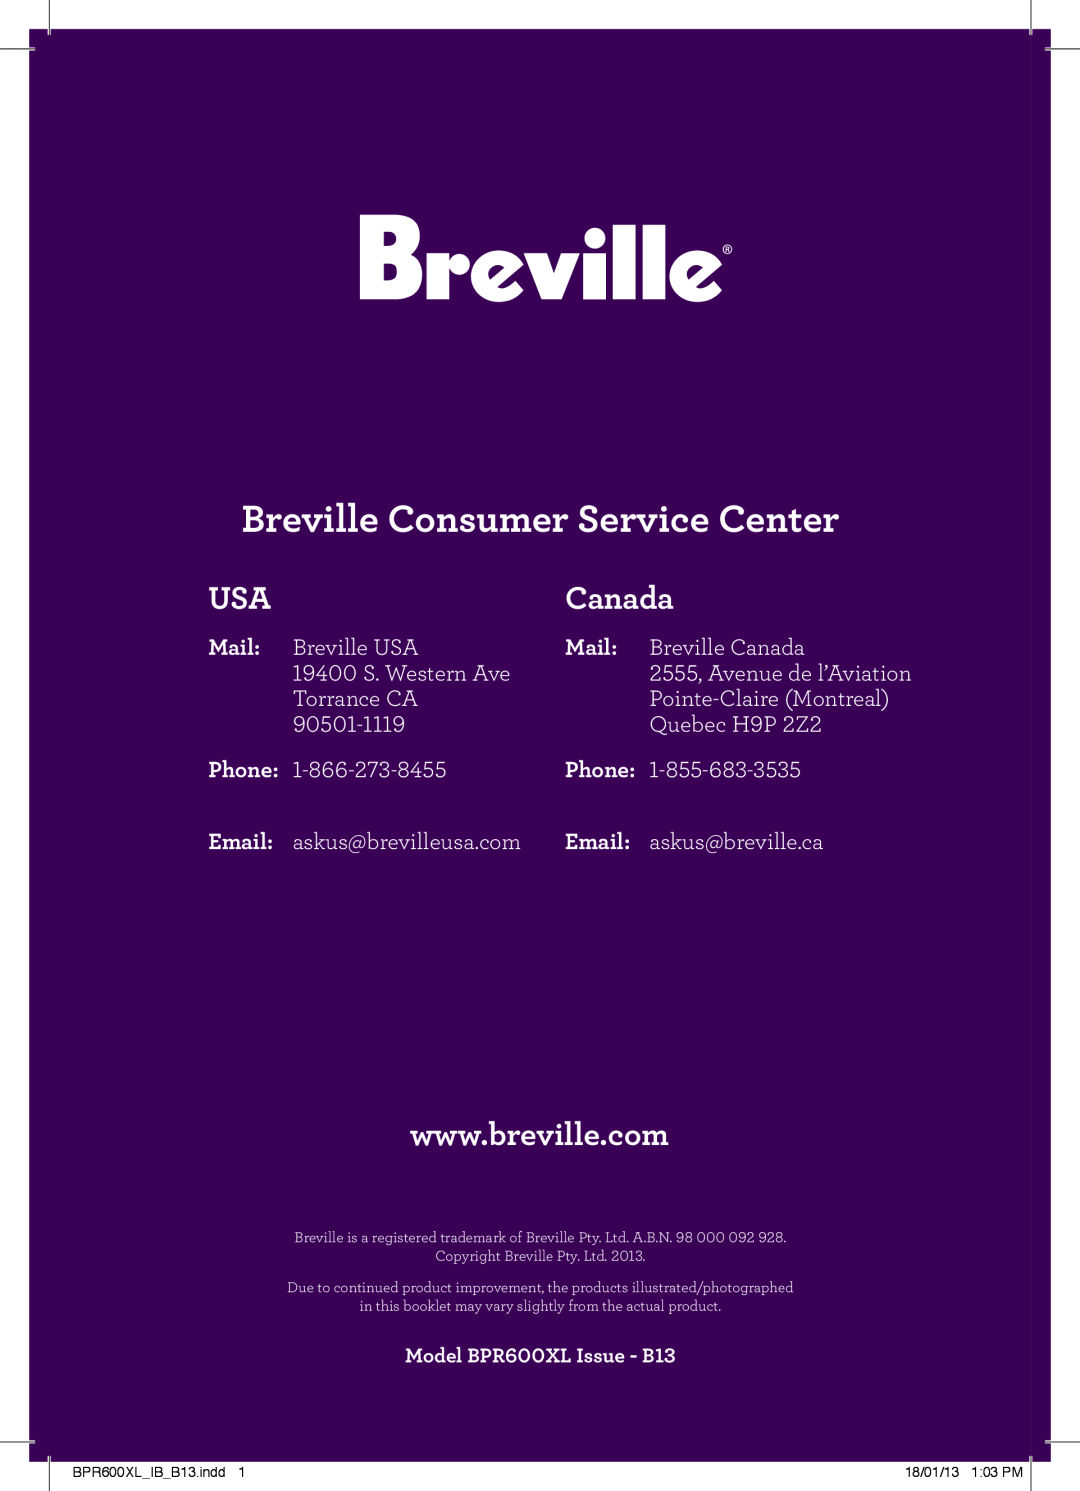 Breville BPR600XL manual Breville Consumer Service Center, Mail, Phone, Email, Canada 